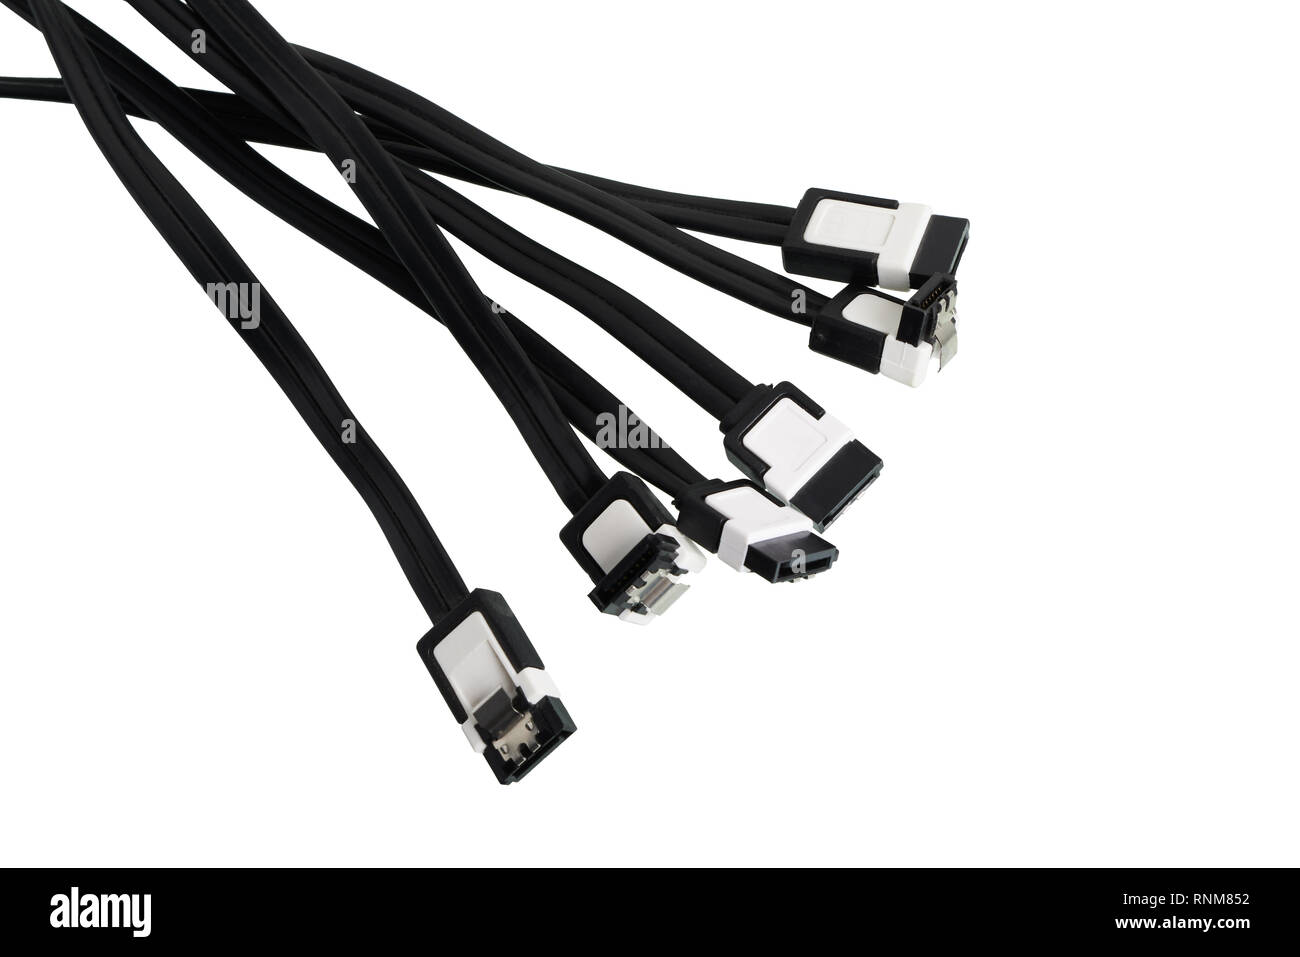 SATA (Serial AT Attachment, Serial ATA) cables, computer bus interface to connect mass storage devices Stock Photo